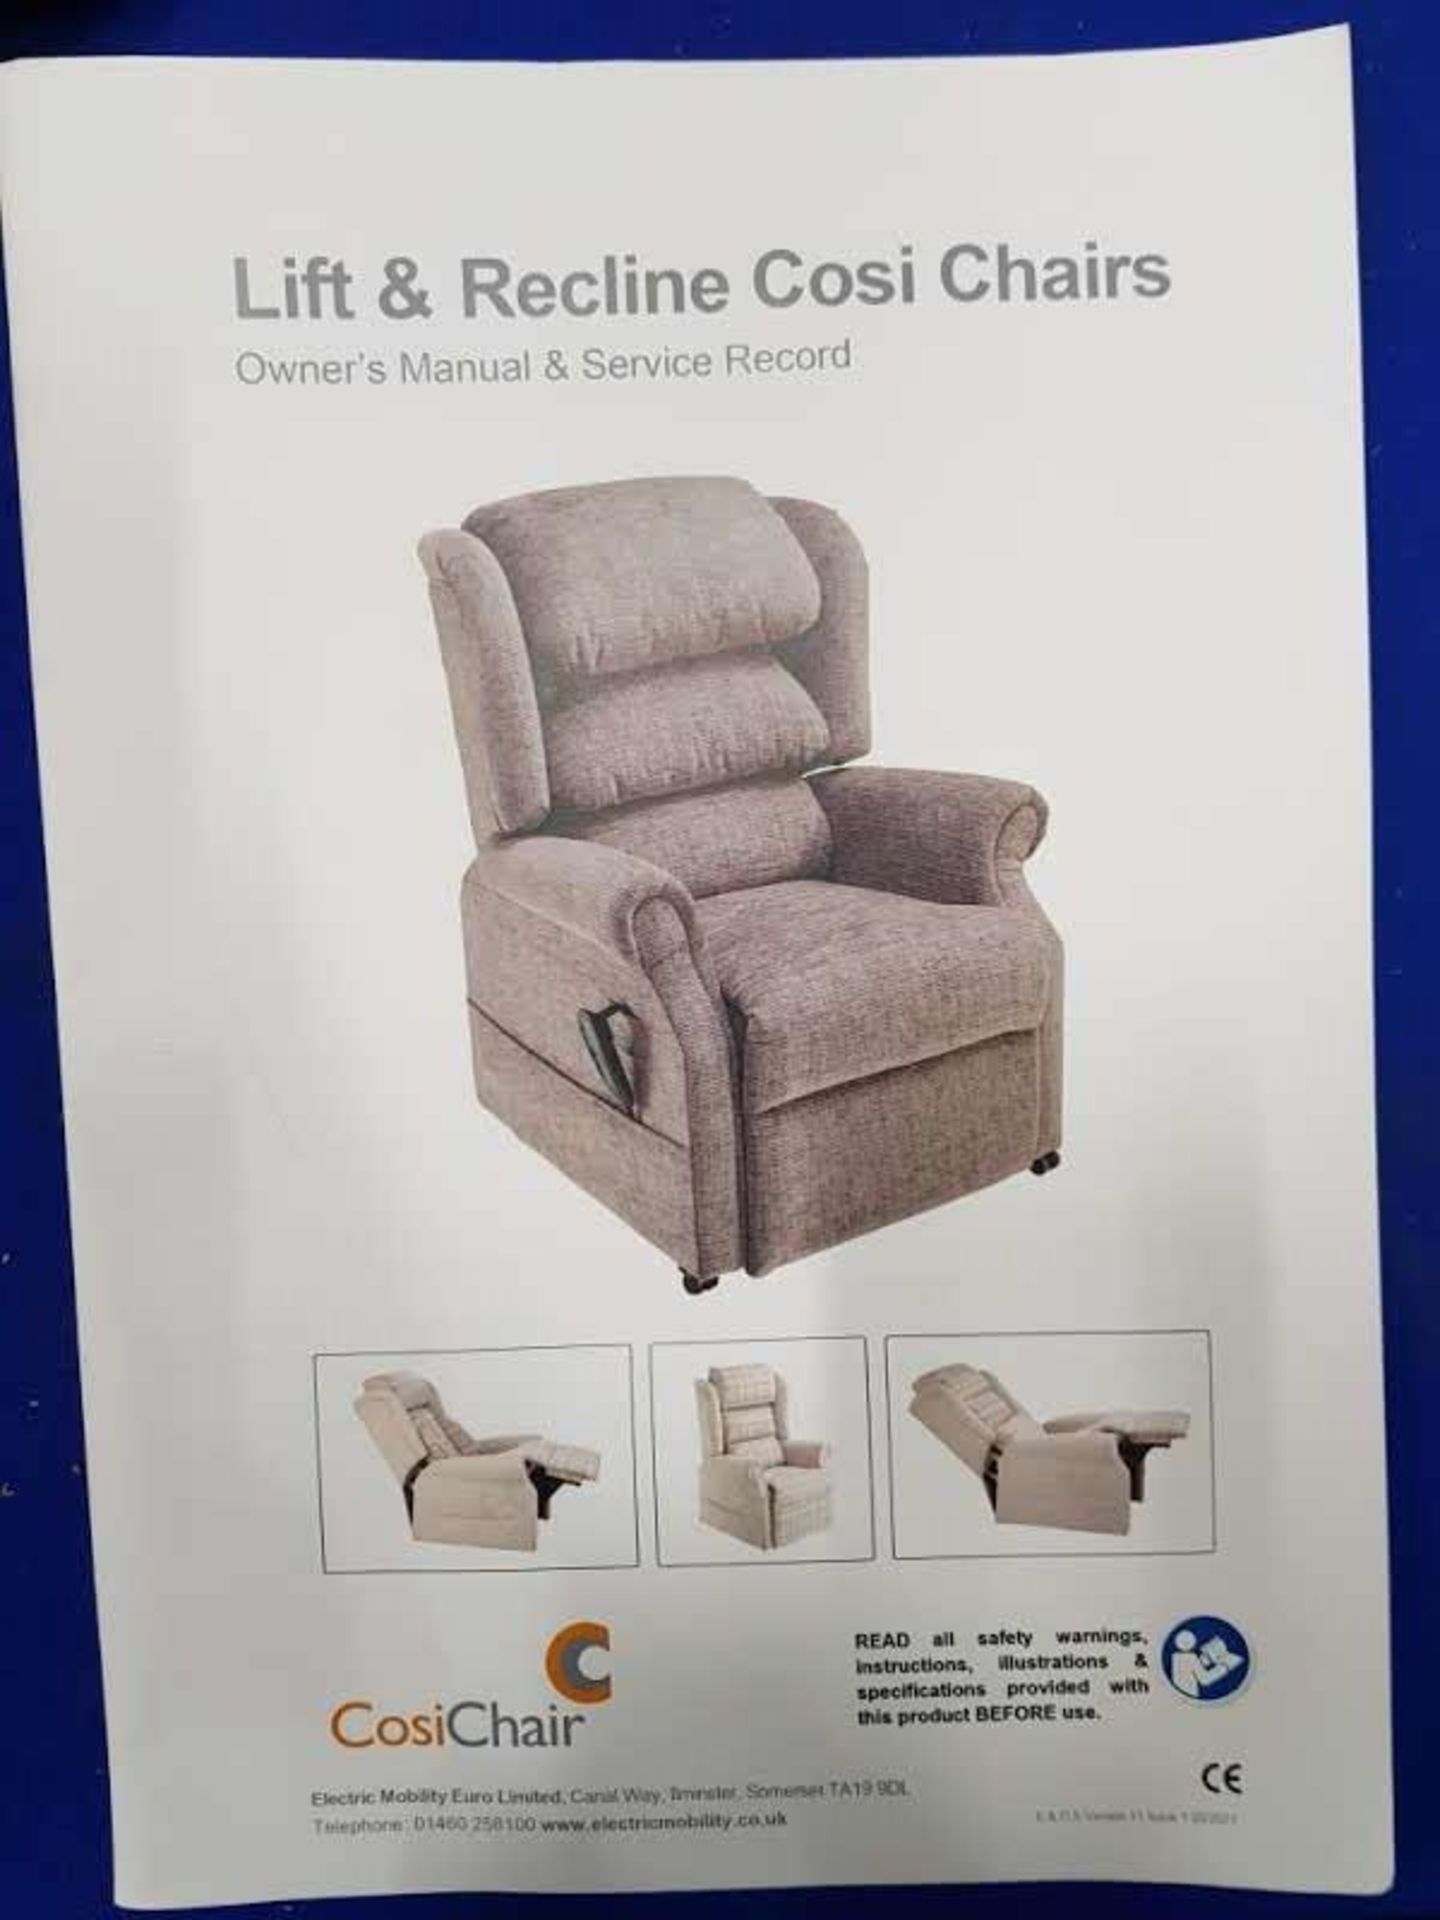 Cosi Chair Lift And Recline Electric Riser 2021 - Image 7 of 8